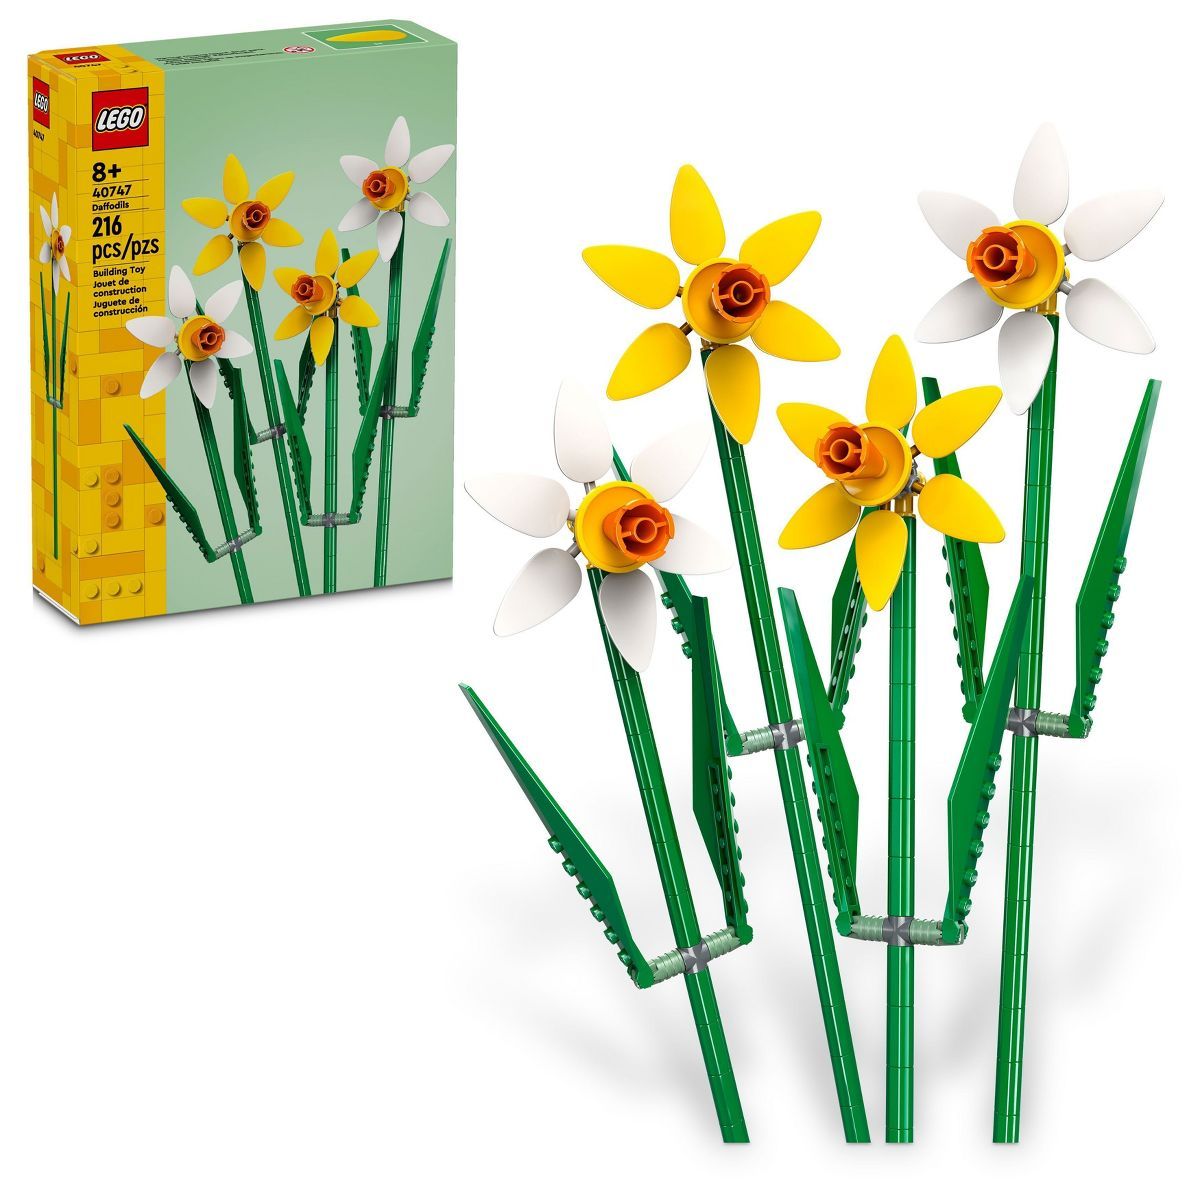 LEGO Daffodils Celebration Gift, Yellow and White Daffodil Room Decor 40747 | Target